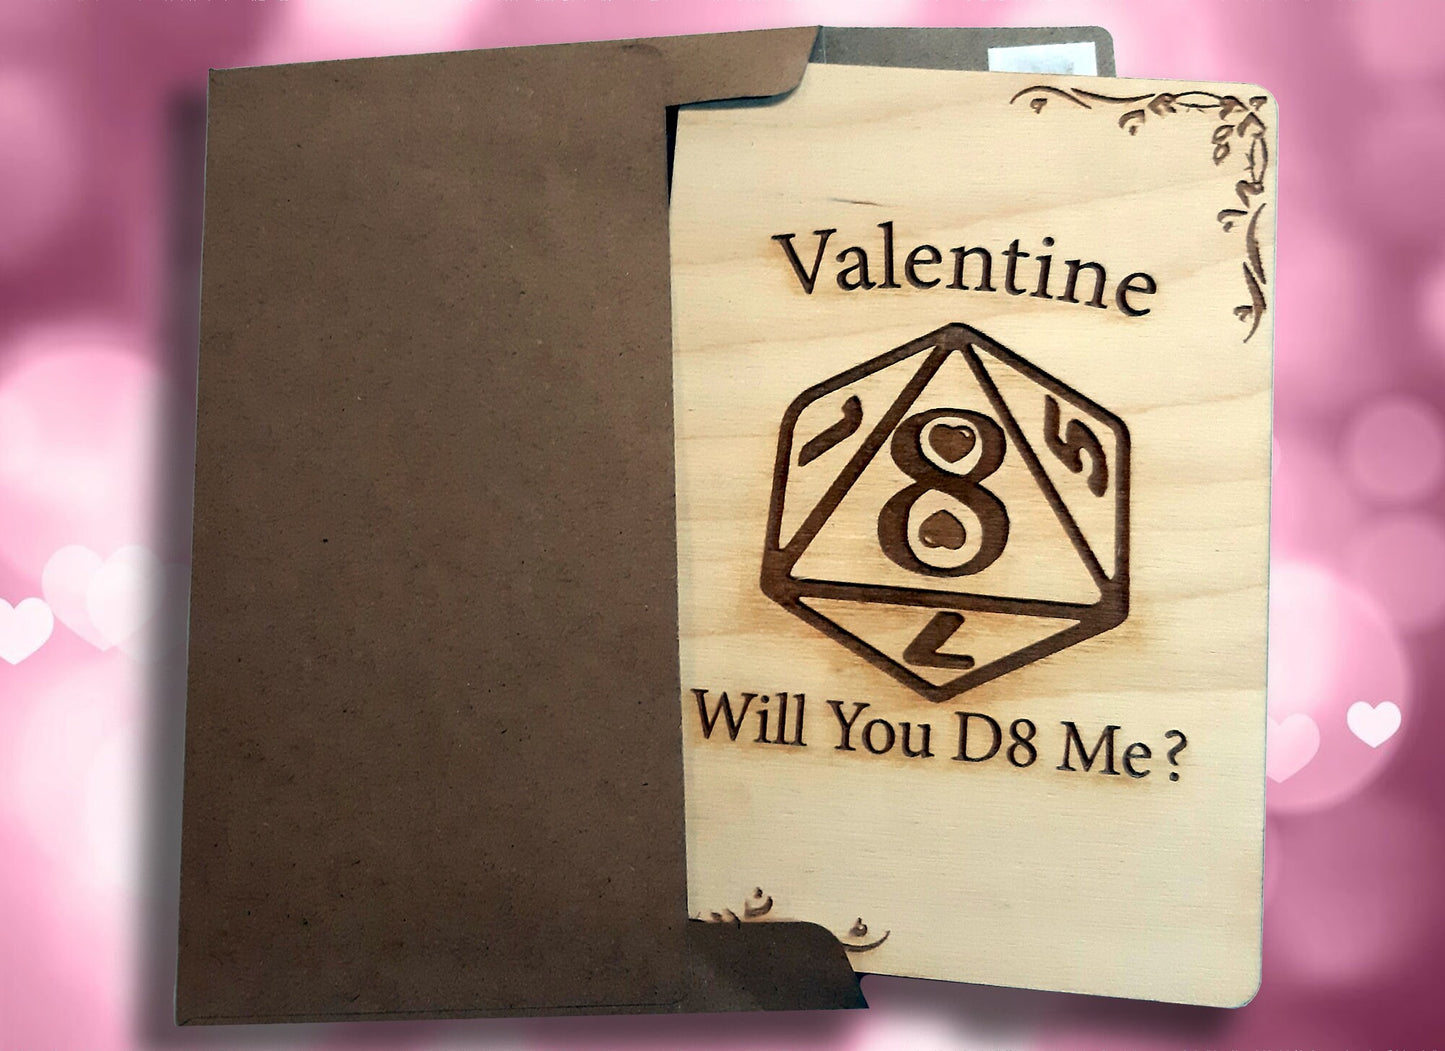 Valentine Card - D8 Me RPG Gaming Clever VDay card, engraved wood, gamer gift, rpg, role-playing games d&d dnd Date